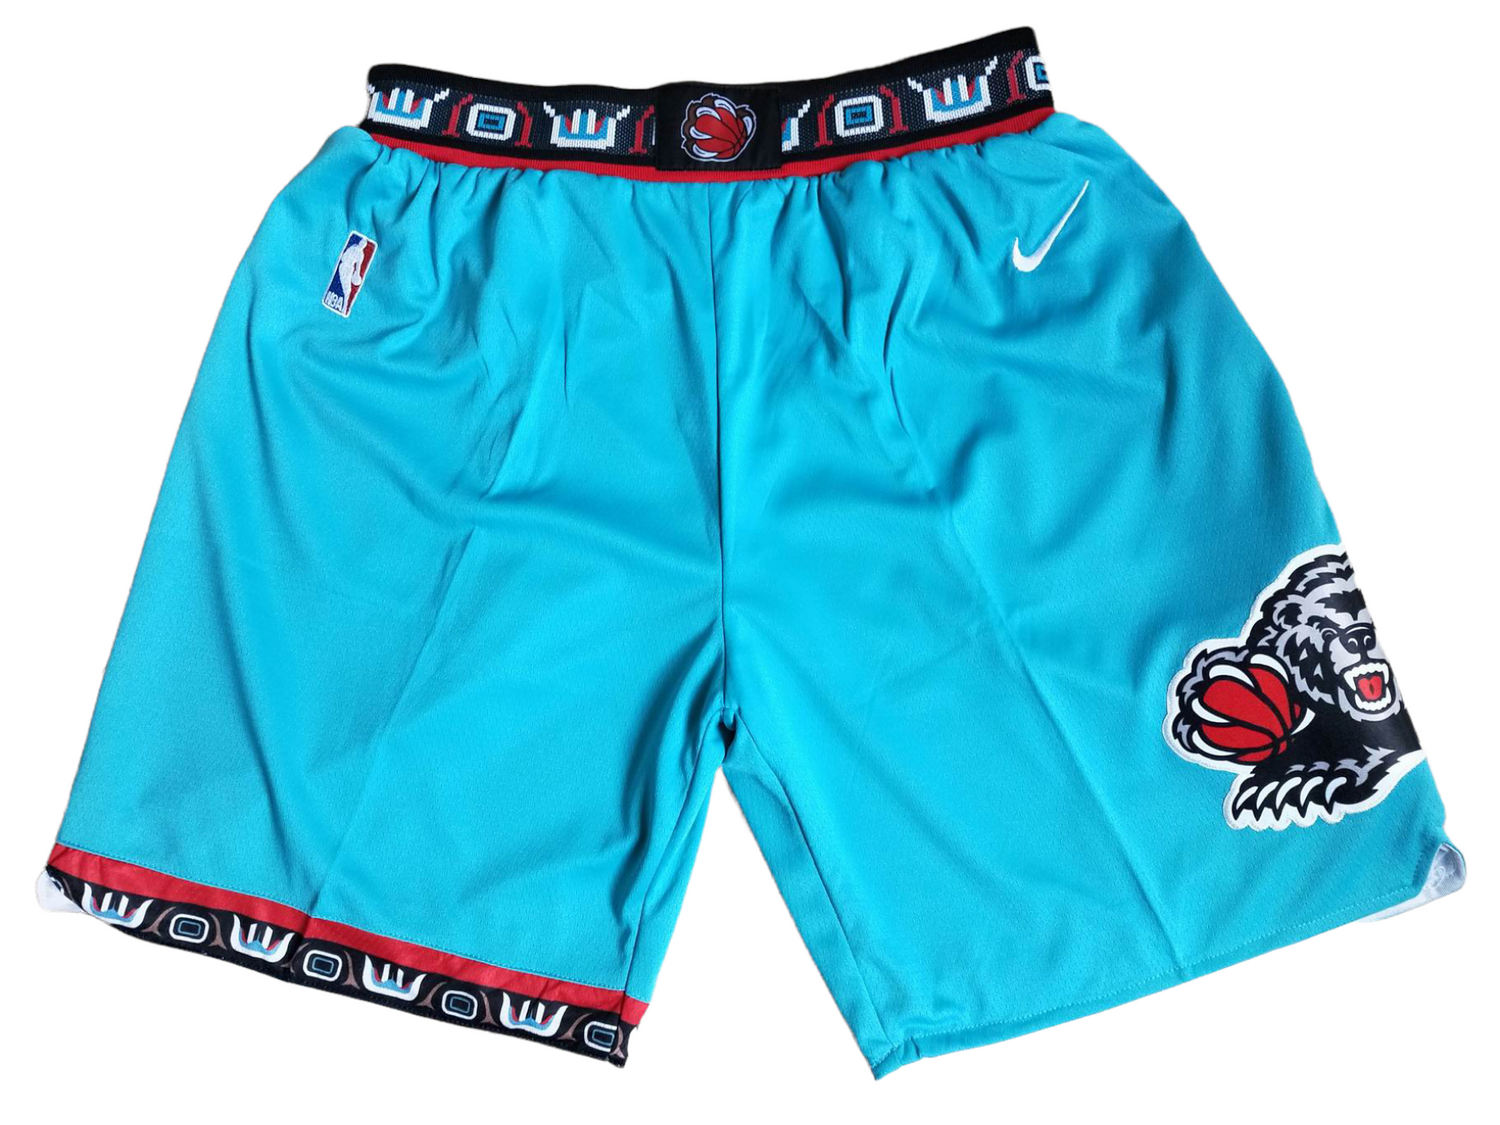 Vancouver Grizzlies Classic White Basketball Shorts